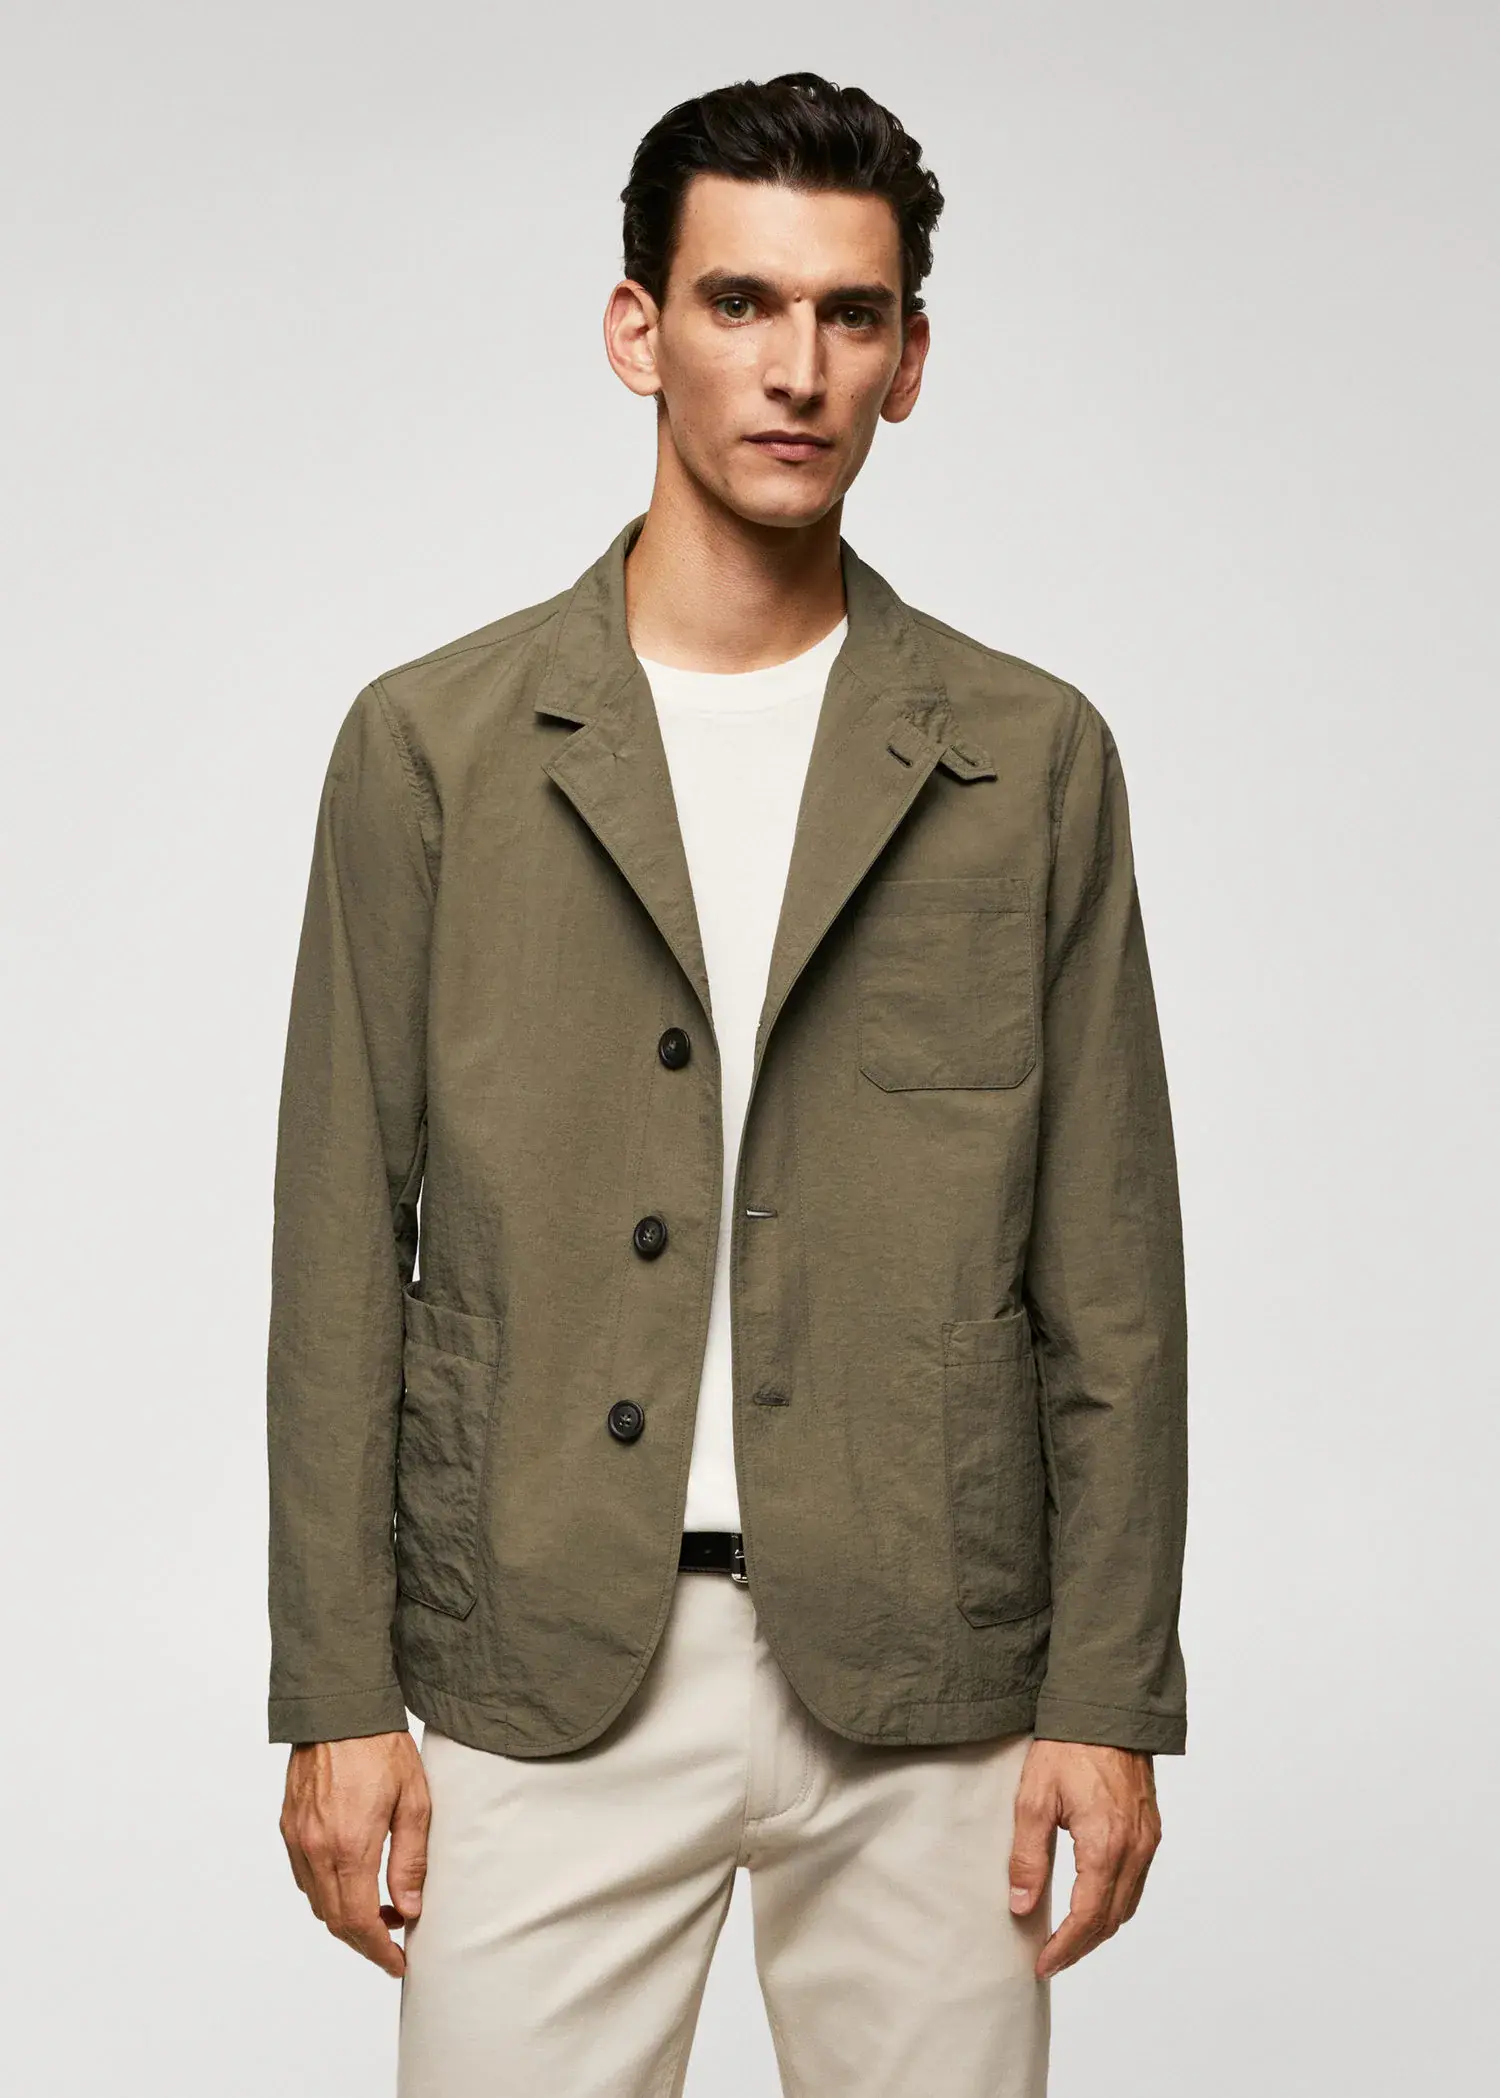 Mango Water-repellent jacket with pockets. 1